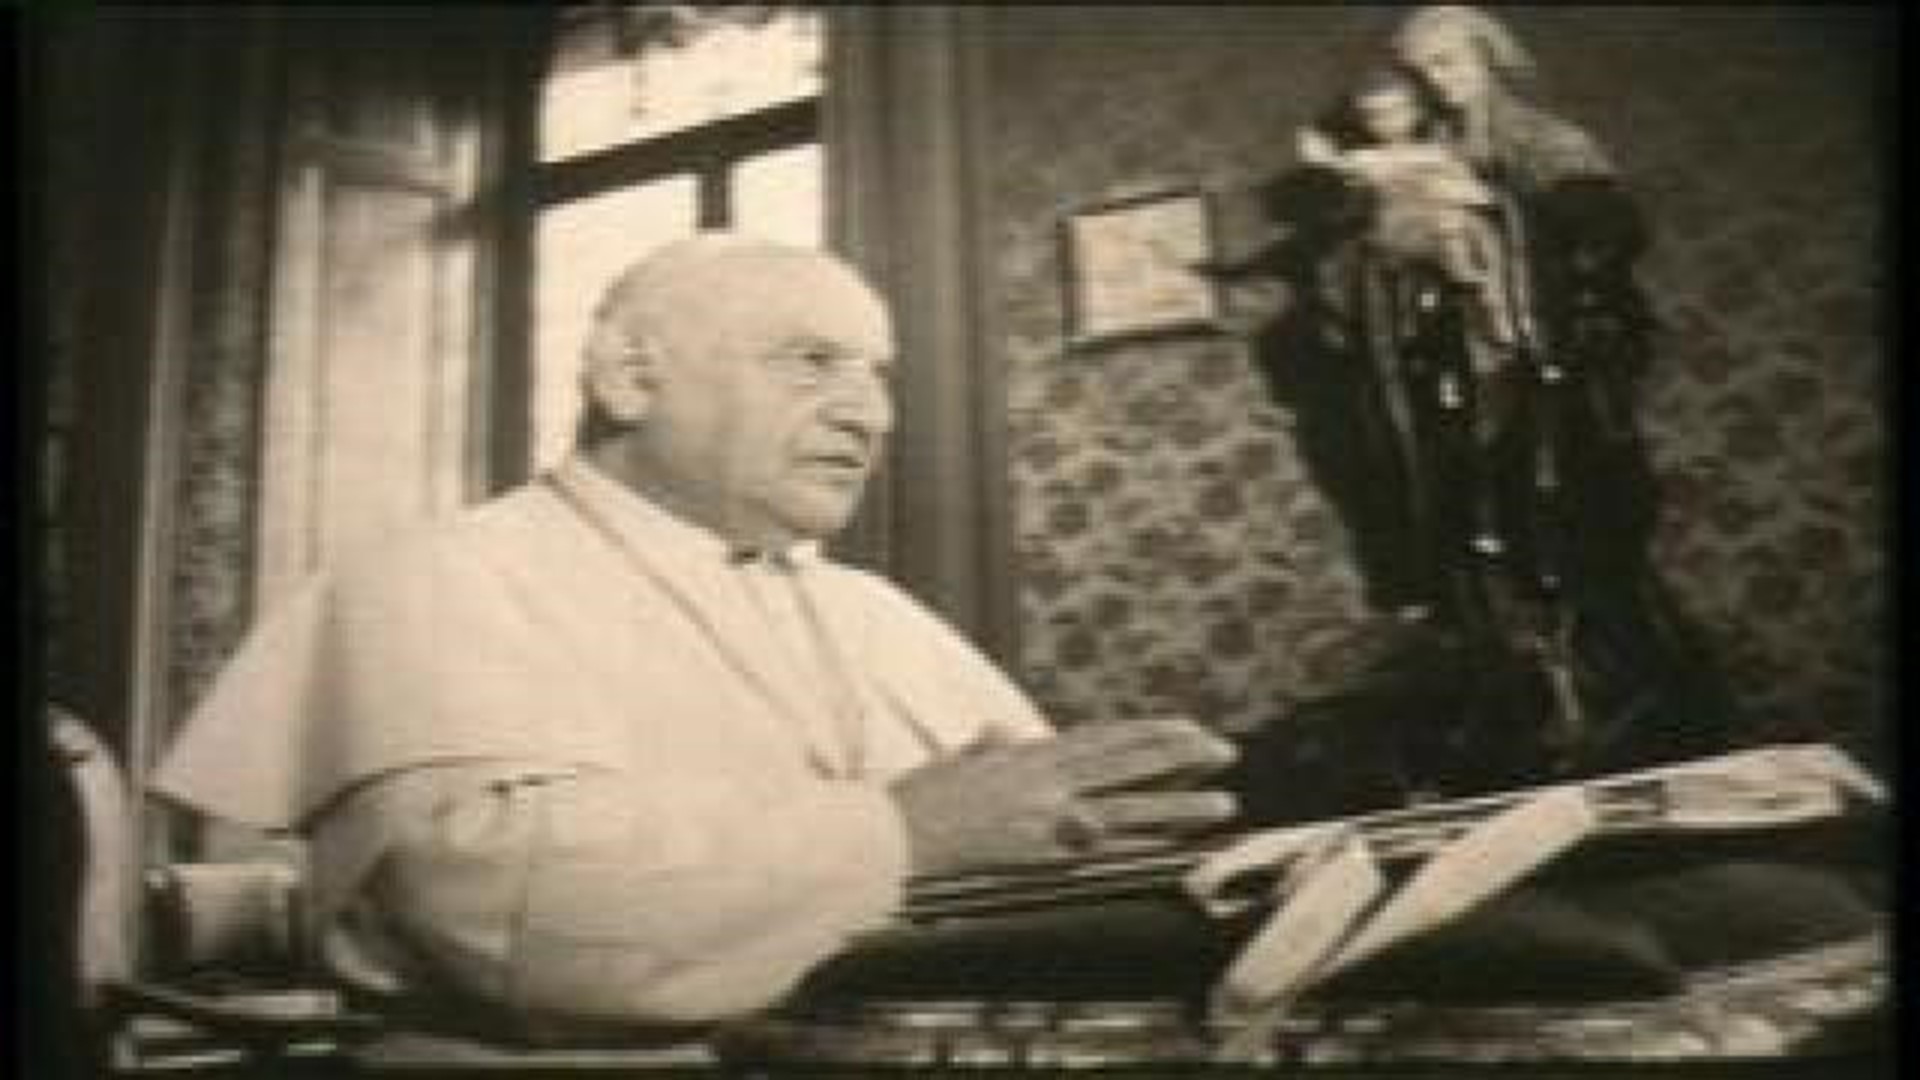 “It’s An Honor To Be Related To A Saint,” Say Relatives Of Pope John XXIII